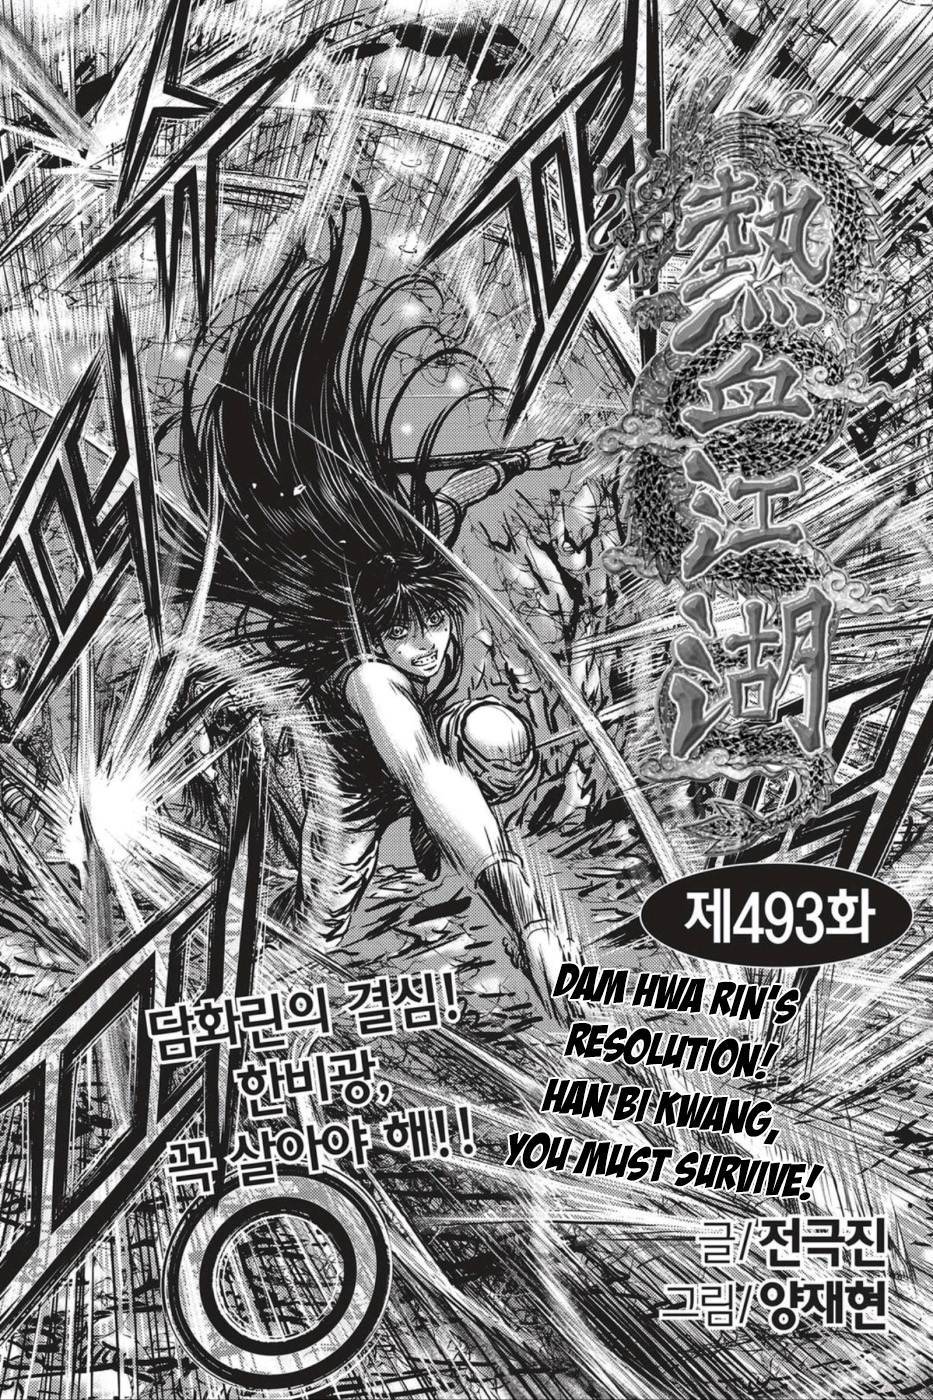 Ruler of the Land Vol.68 Ch.493